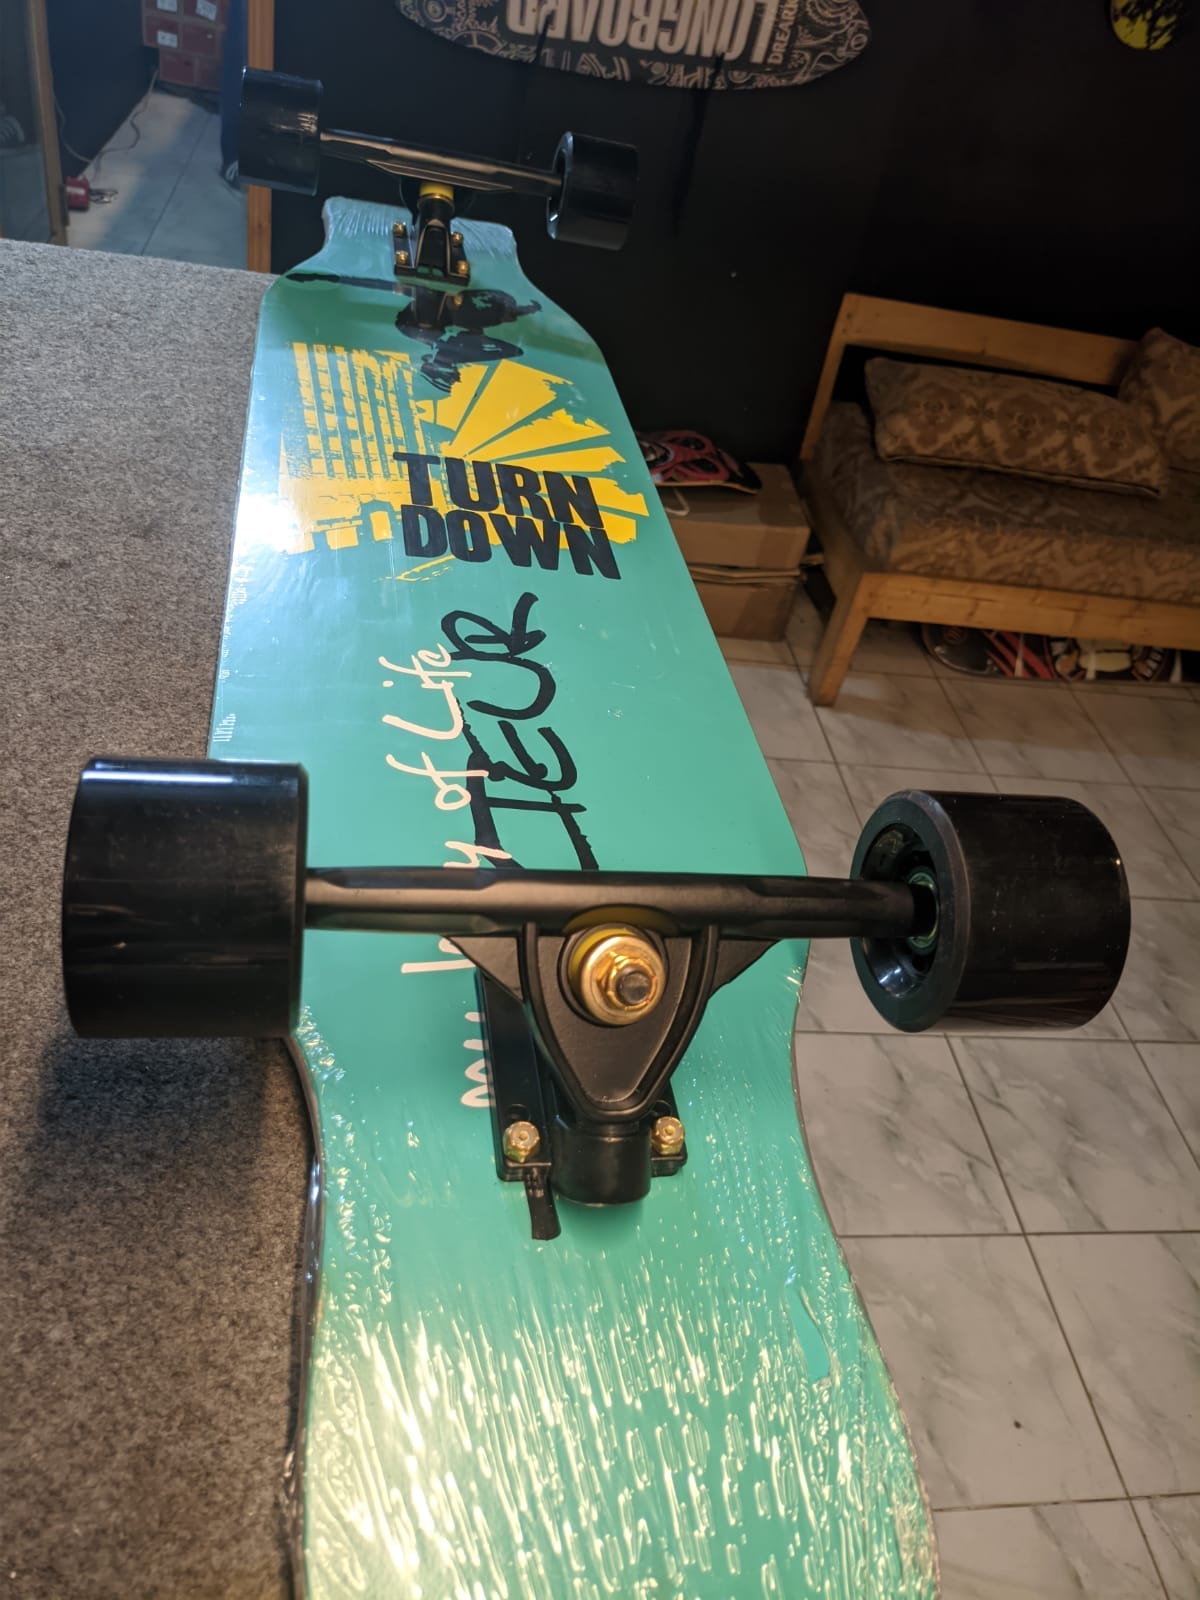 What are double-drop longboards good for?